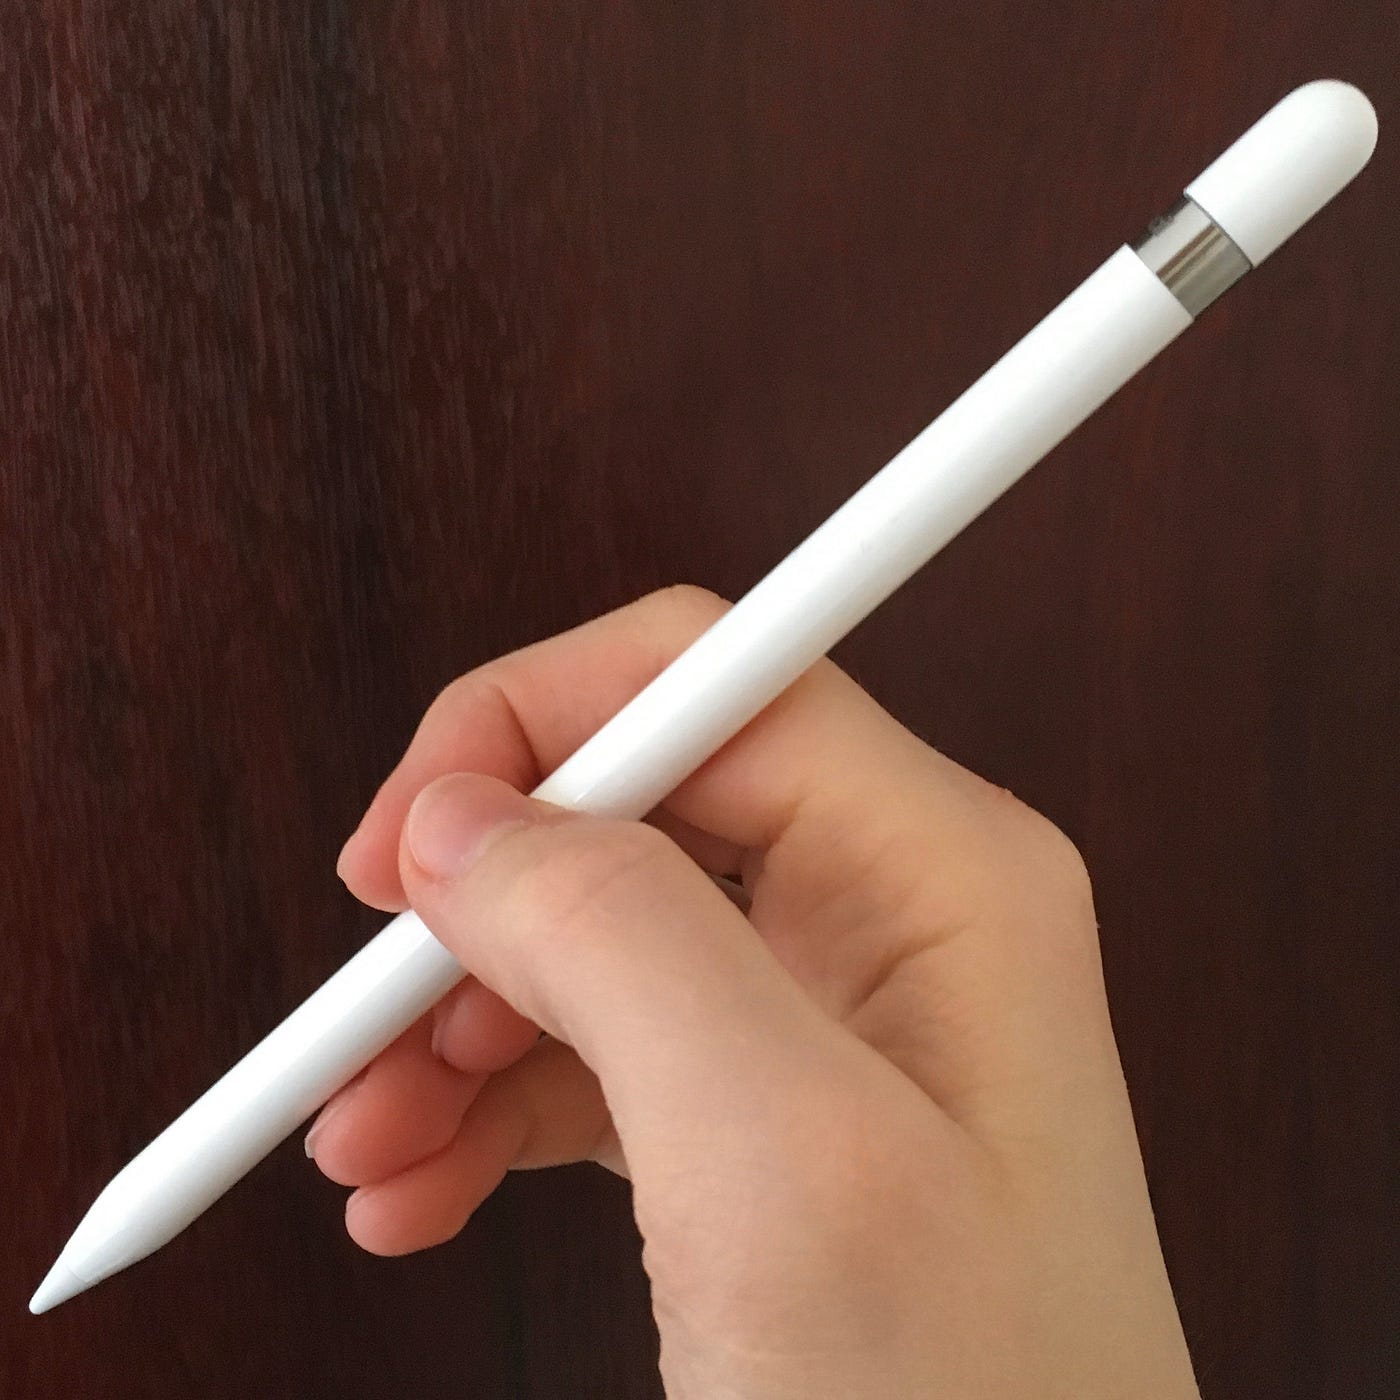 What Is The Best Pen For Your Marginalia?